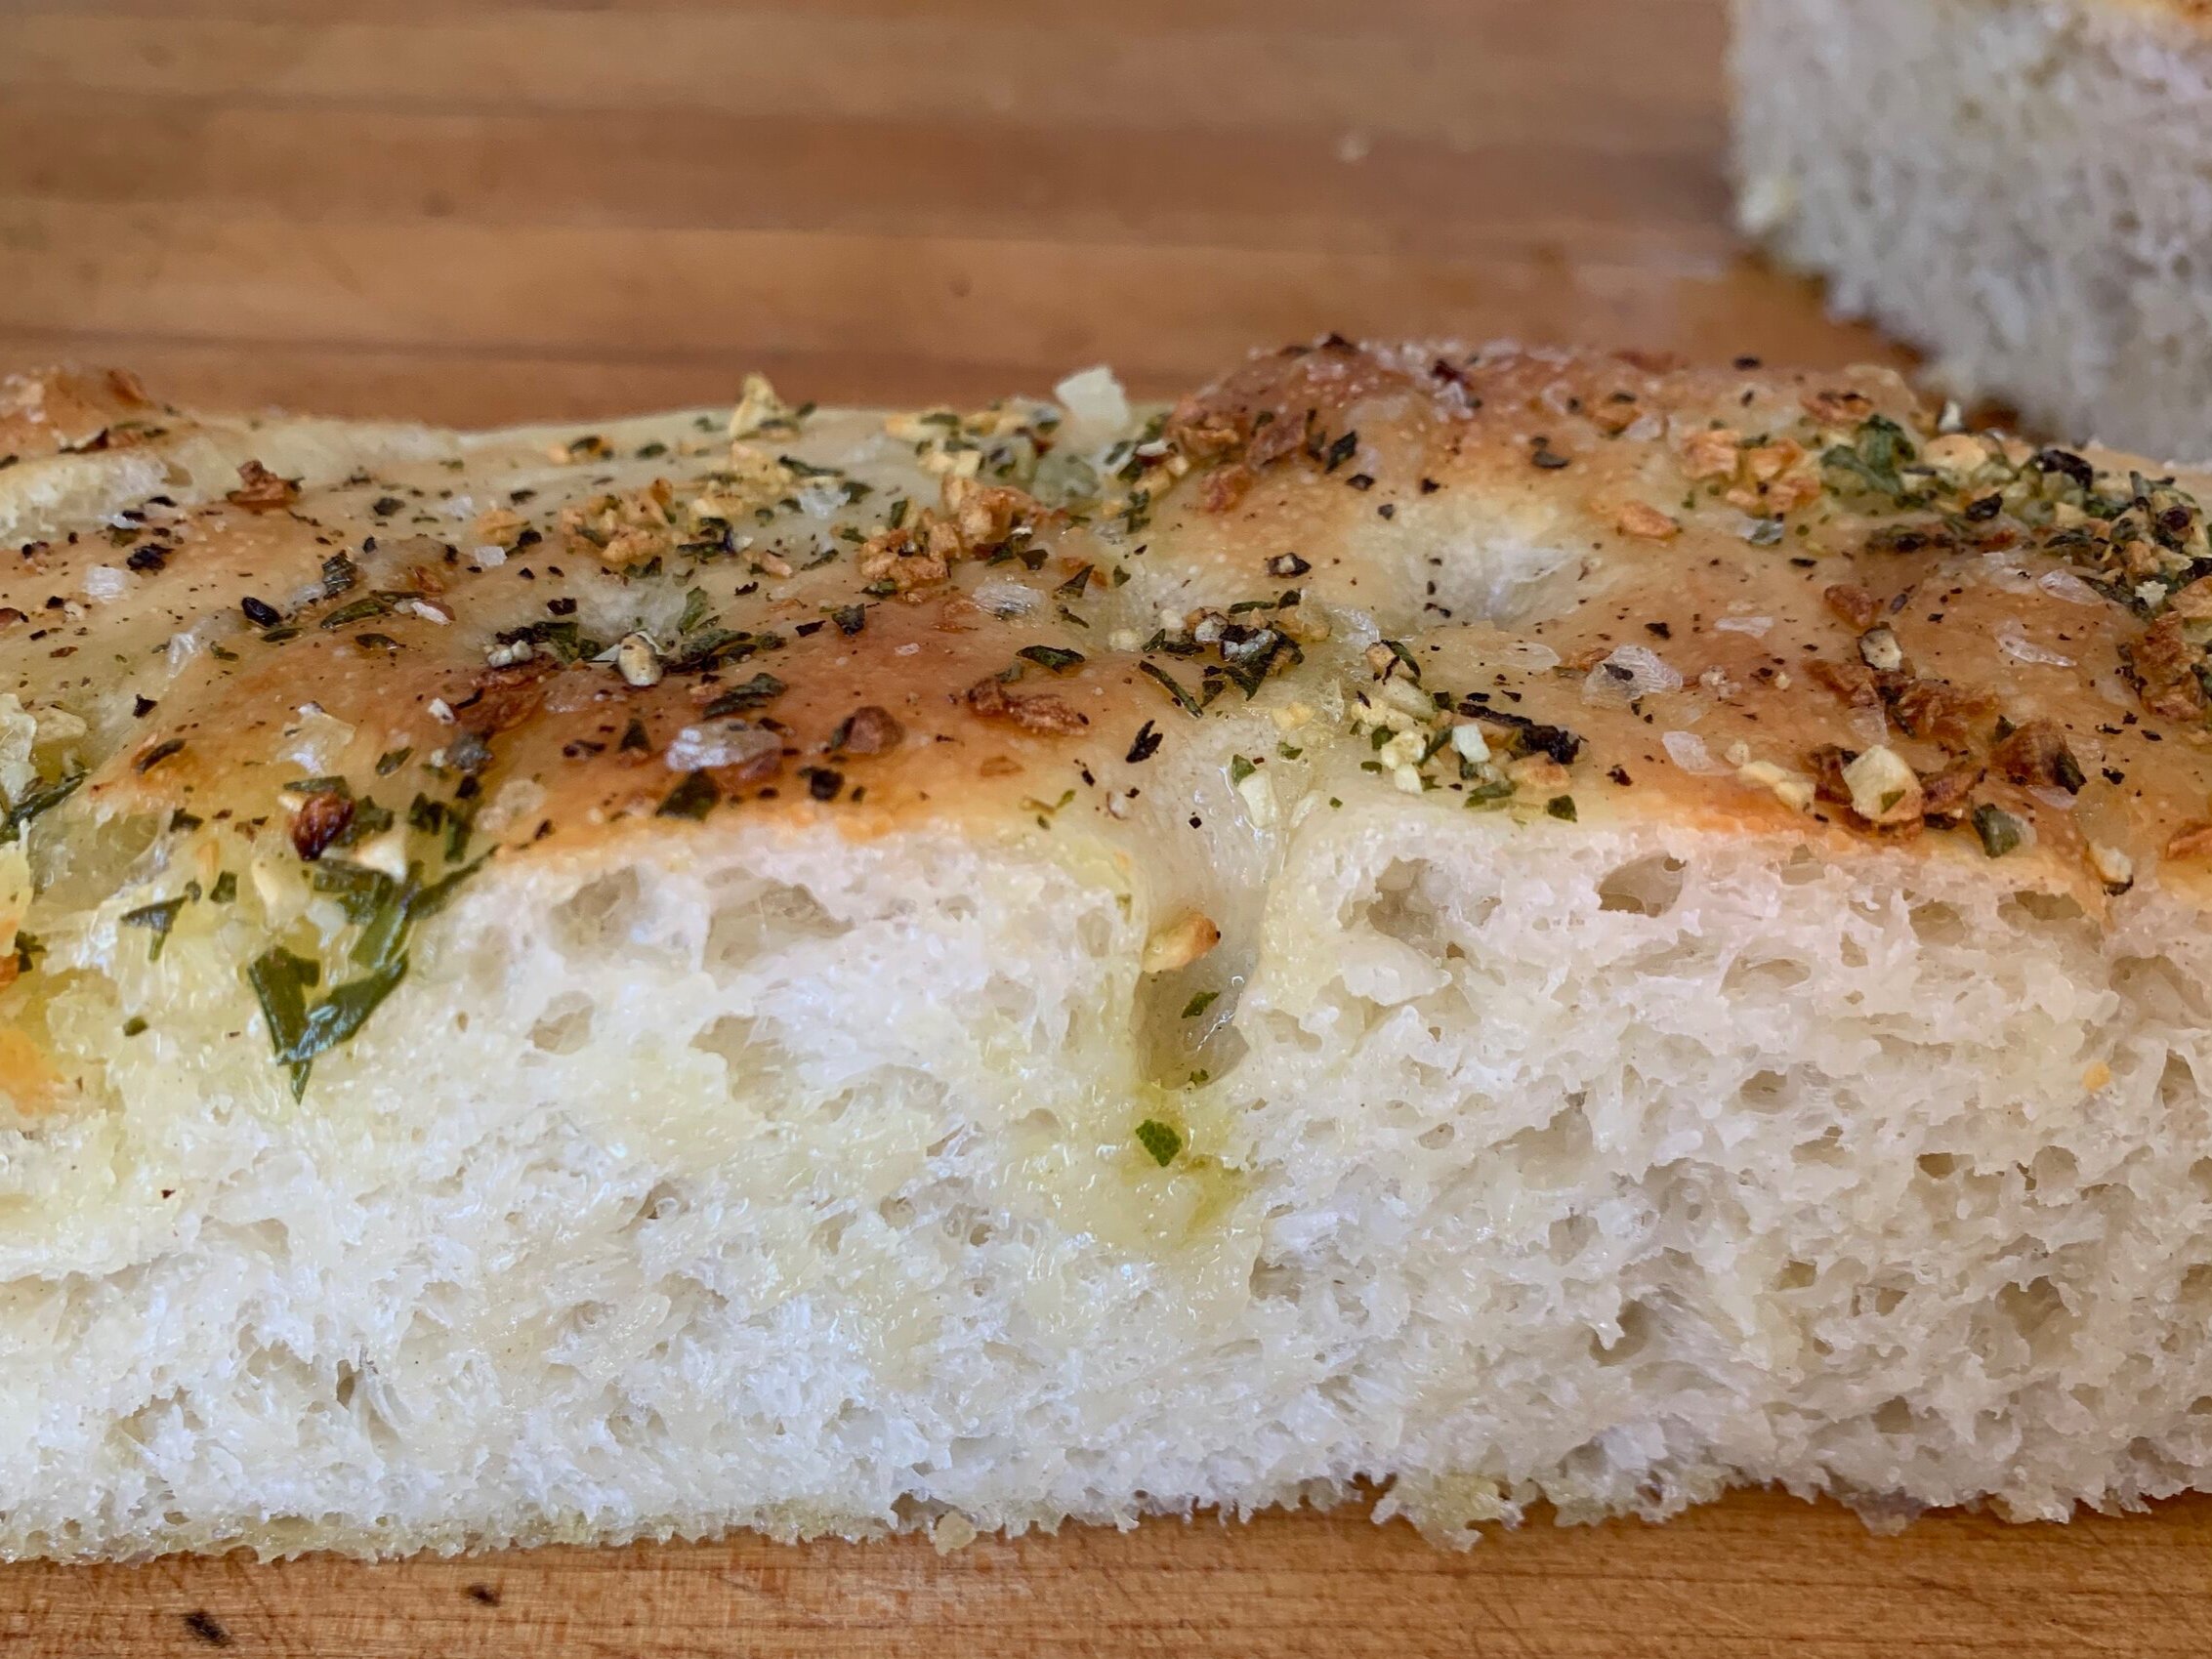 Light and airy focaccia ready for eating